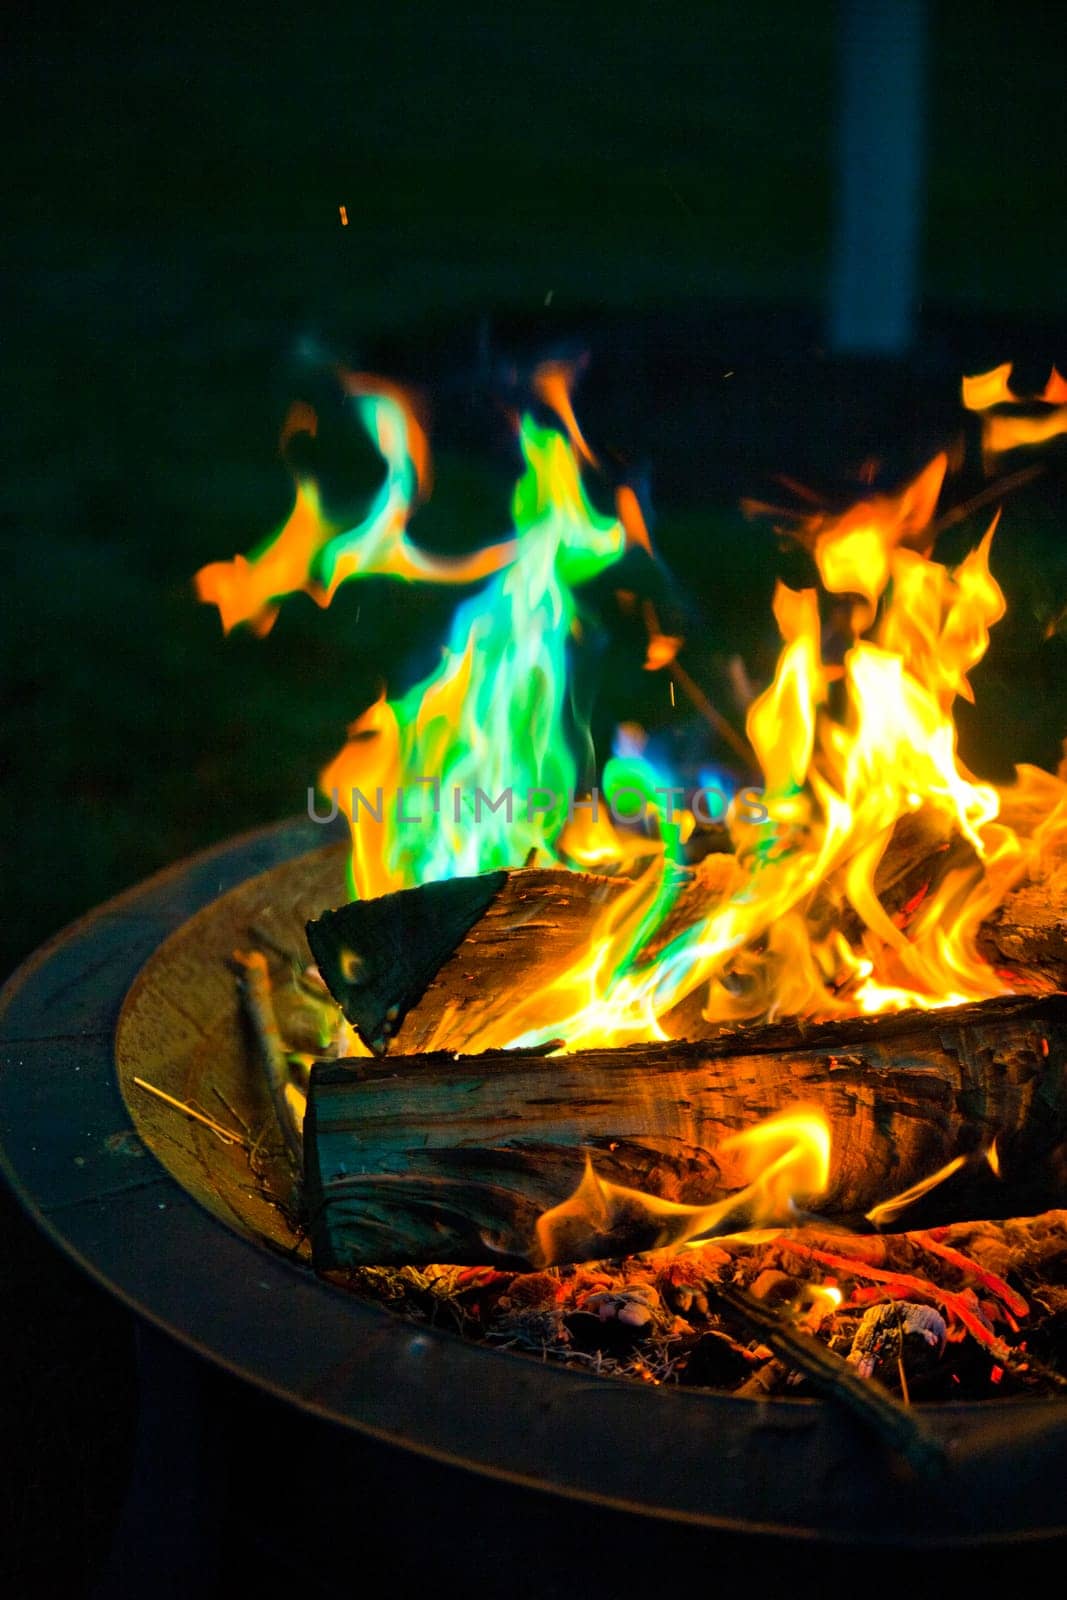 Experience the captivating magic of a vibrant campfire with green flames. The mesmerizing dance of colorful flames adds a touch of enchantment to outdoor gatherings and camping adventures. Safe and controlled within a metal fire pit.